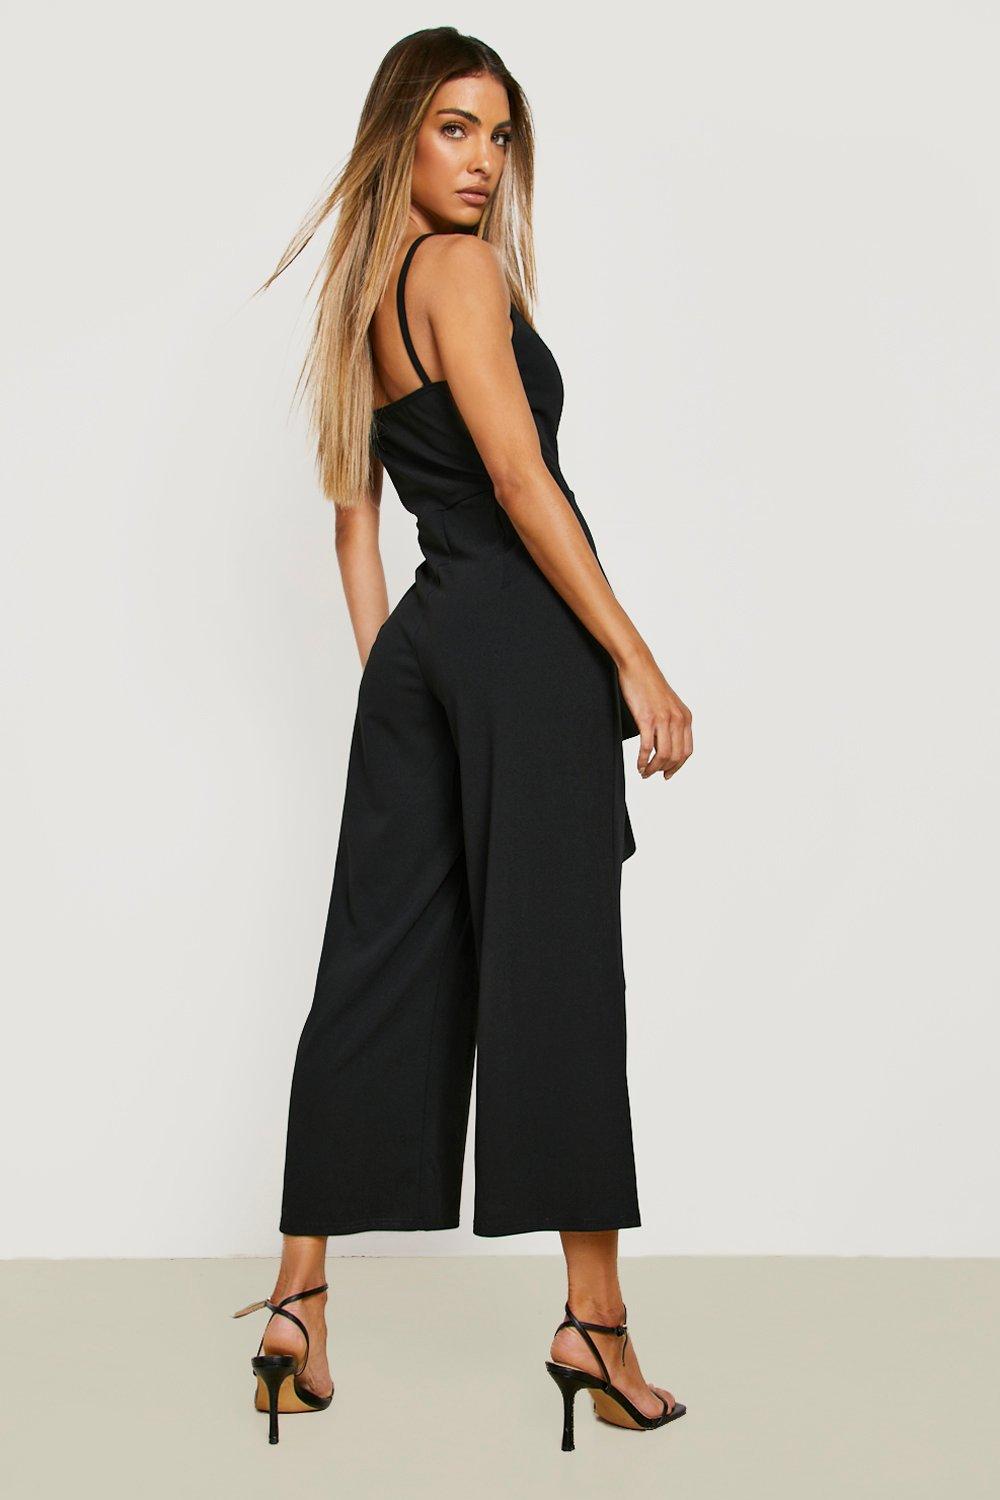 Boohoo Women Clothing Shorts Culottes Womens Strappy Frill Detail Culotte Jumpsuit 4 